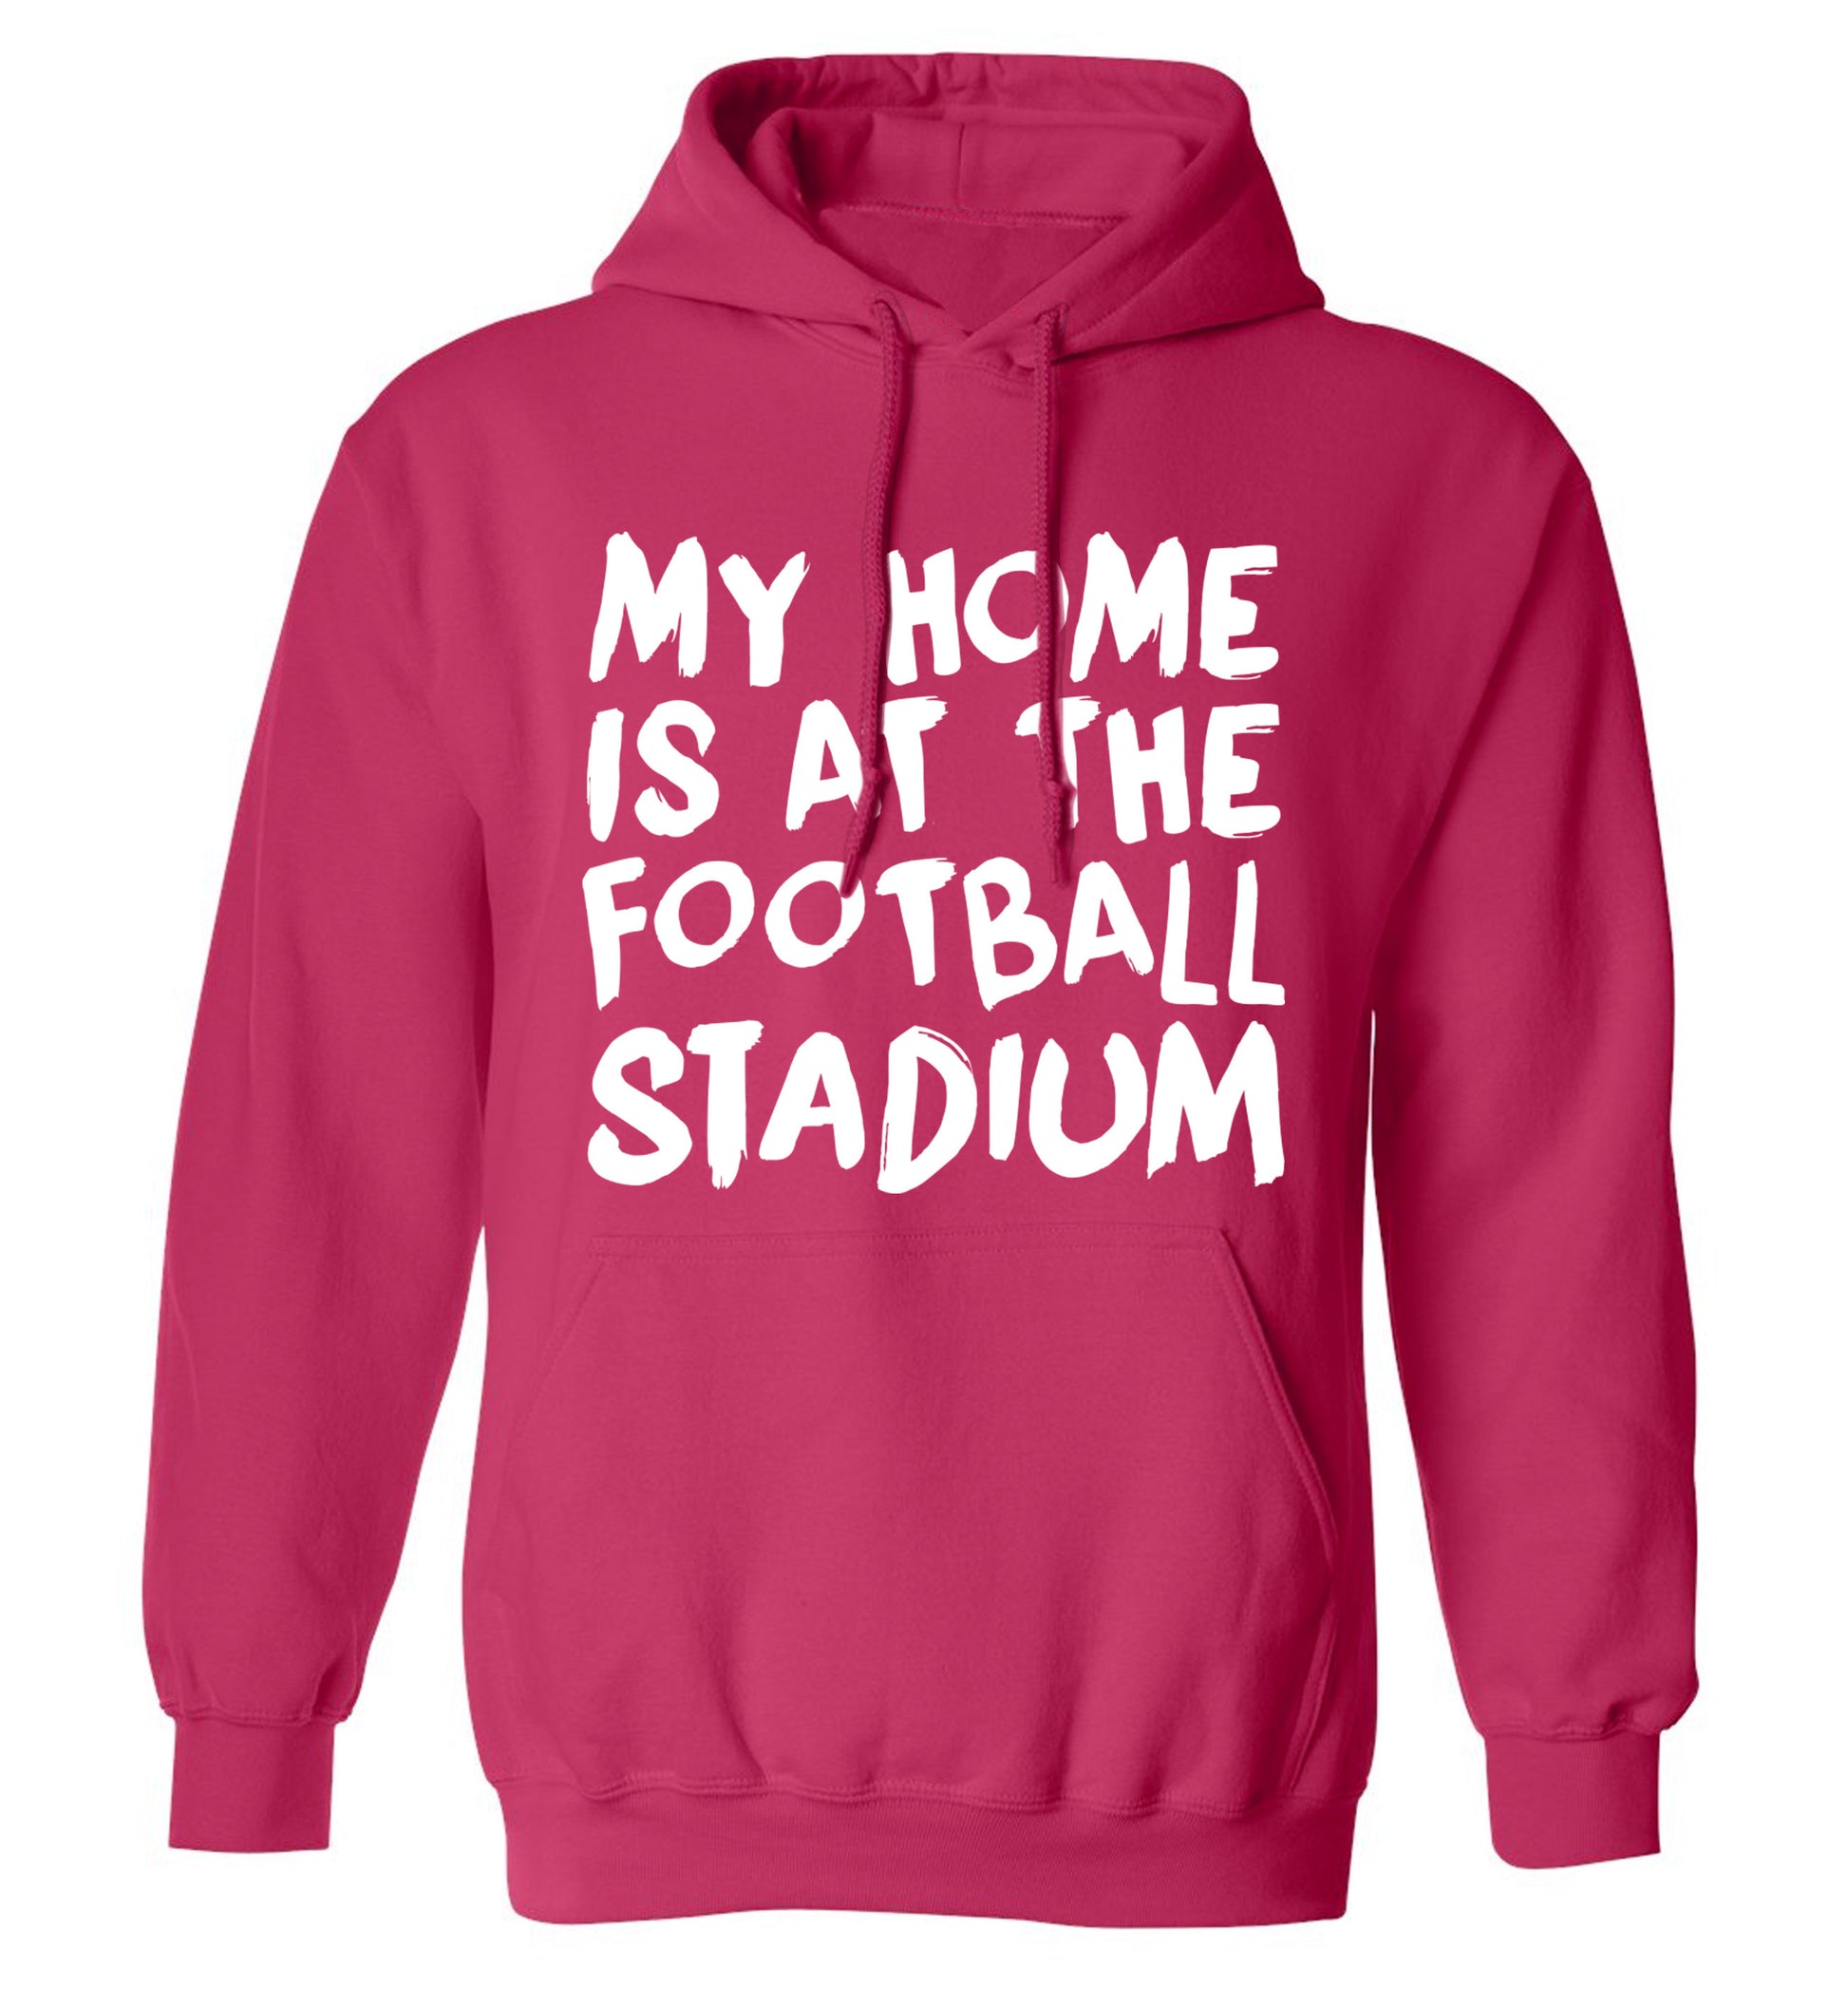 My home is at the football stadium adults unisex pink hoodie 2XL